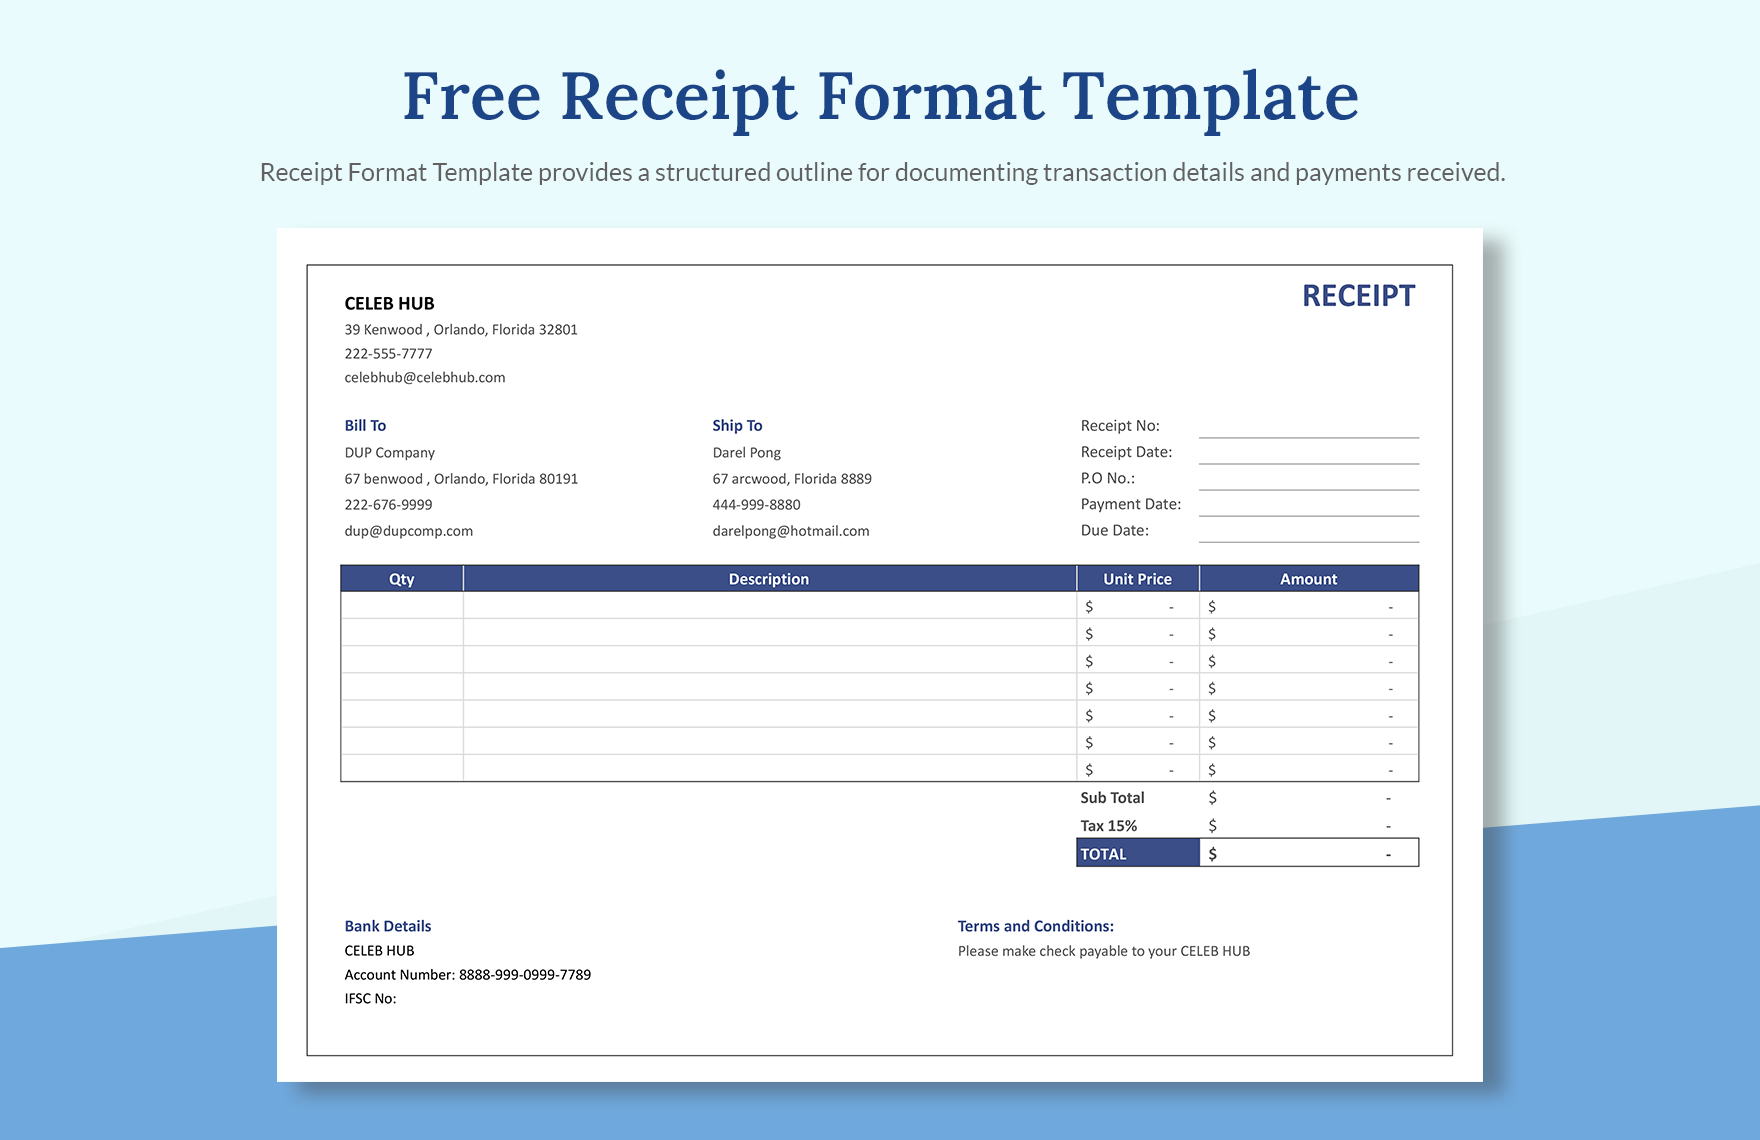 Free Receipt Format Template Download In Word Google Docs Excel Google Sheets Apple Pages